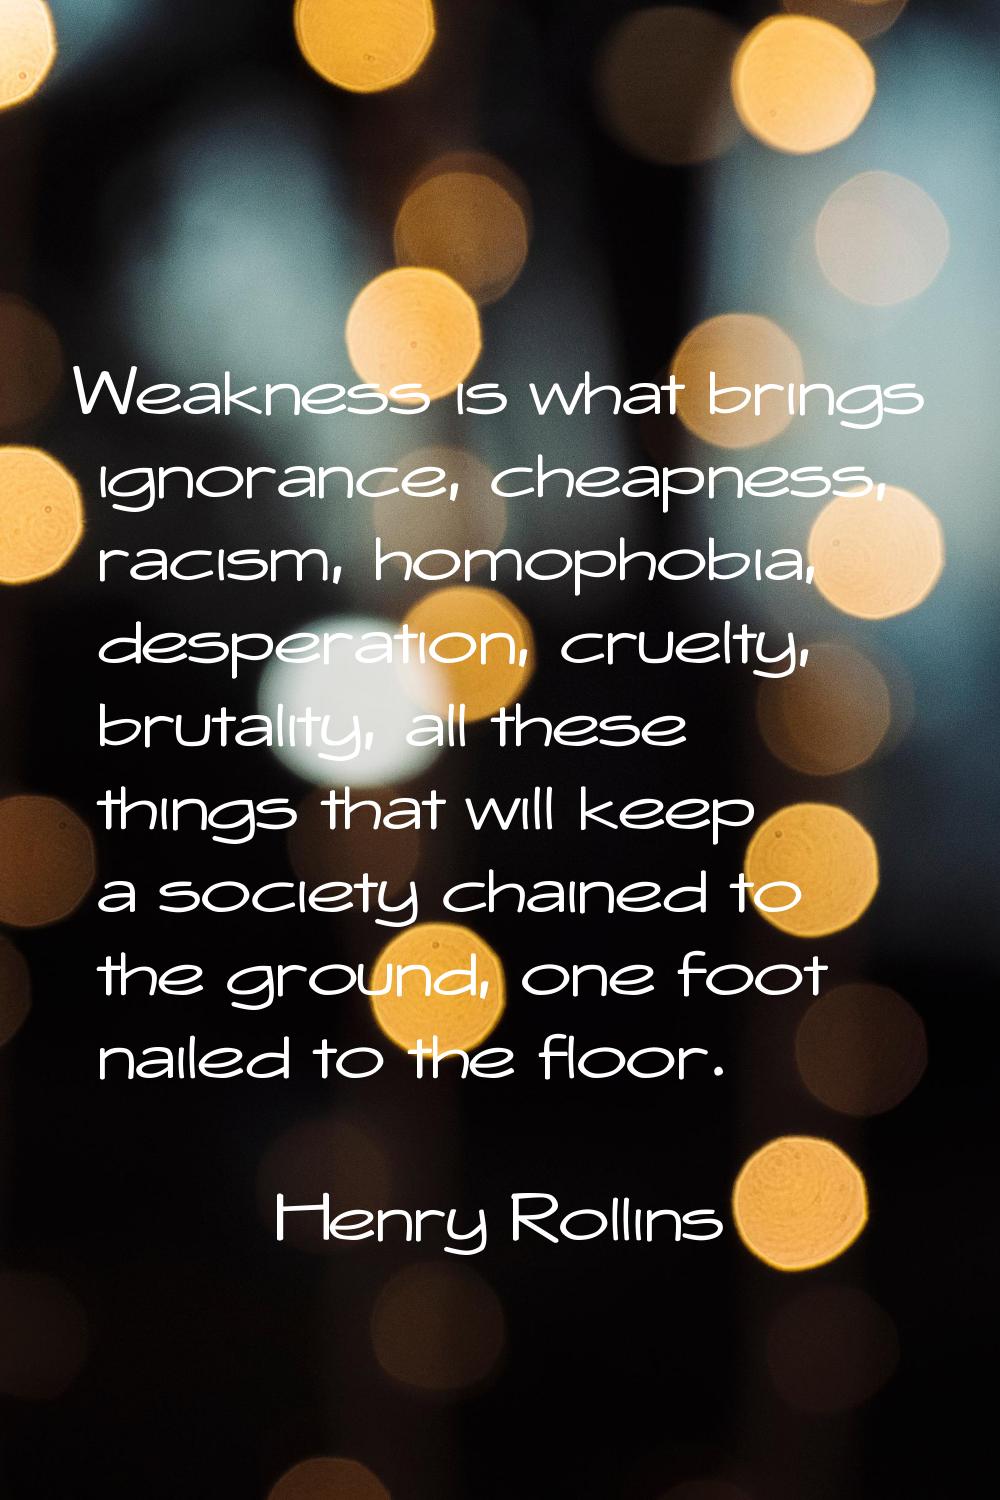 Weakness is what brings ignorance, cheapness, racism, homophobia, desperation, cruelty, brutality, 